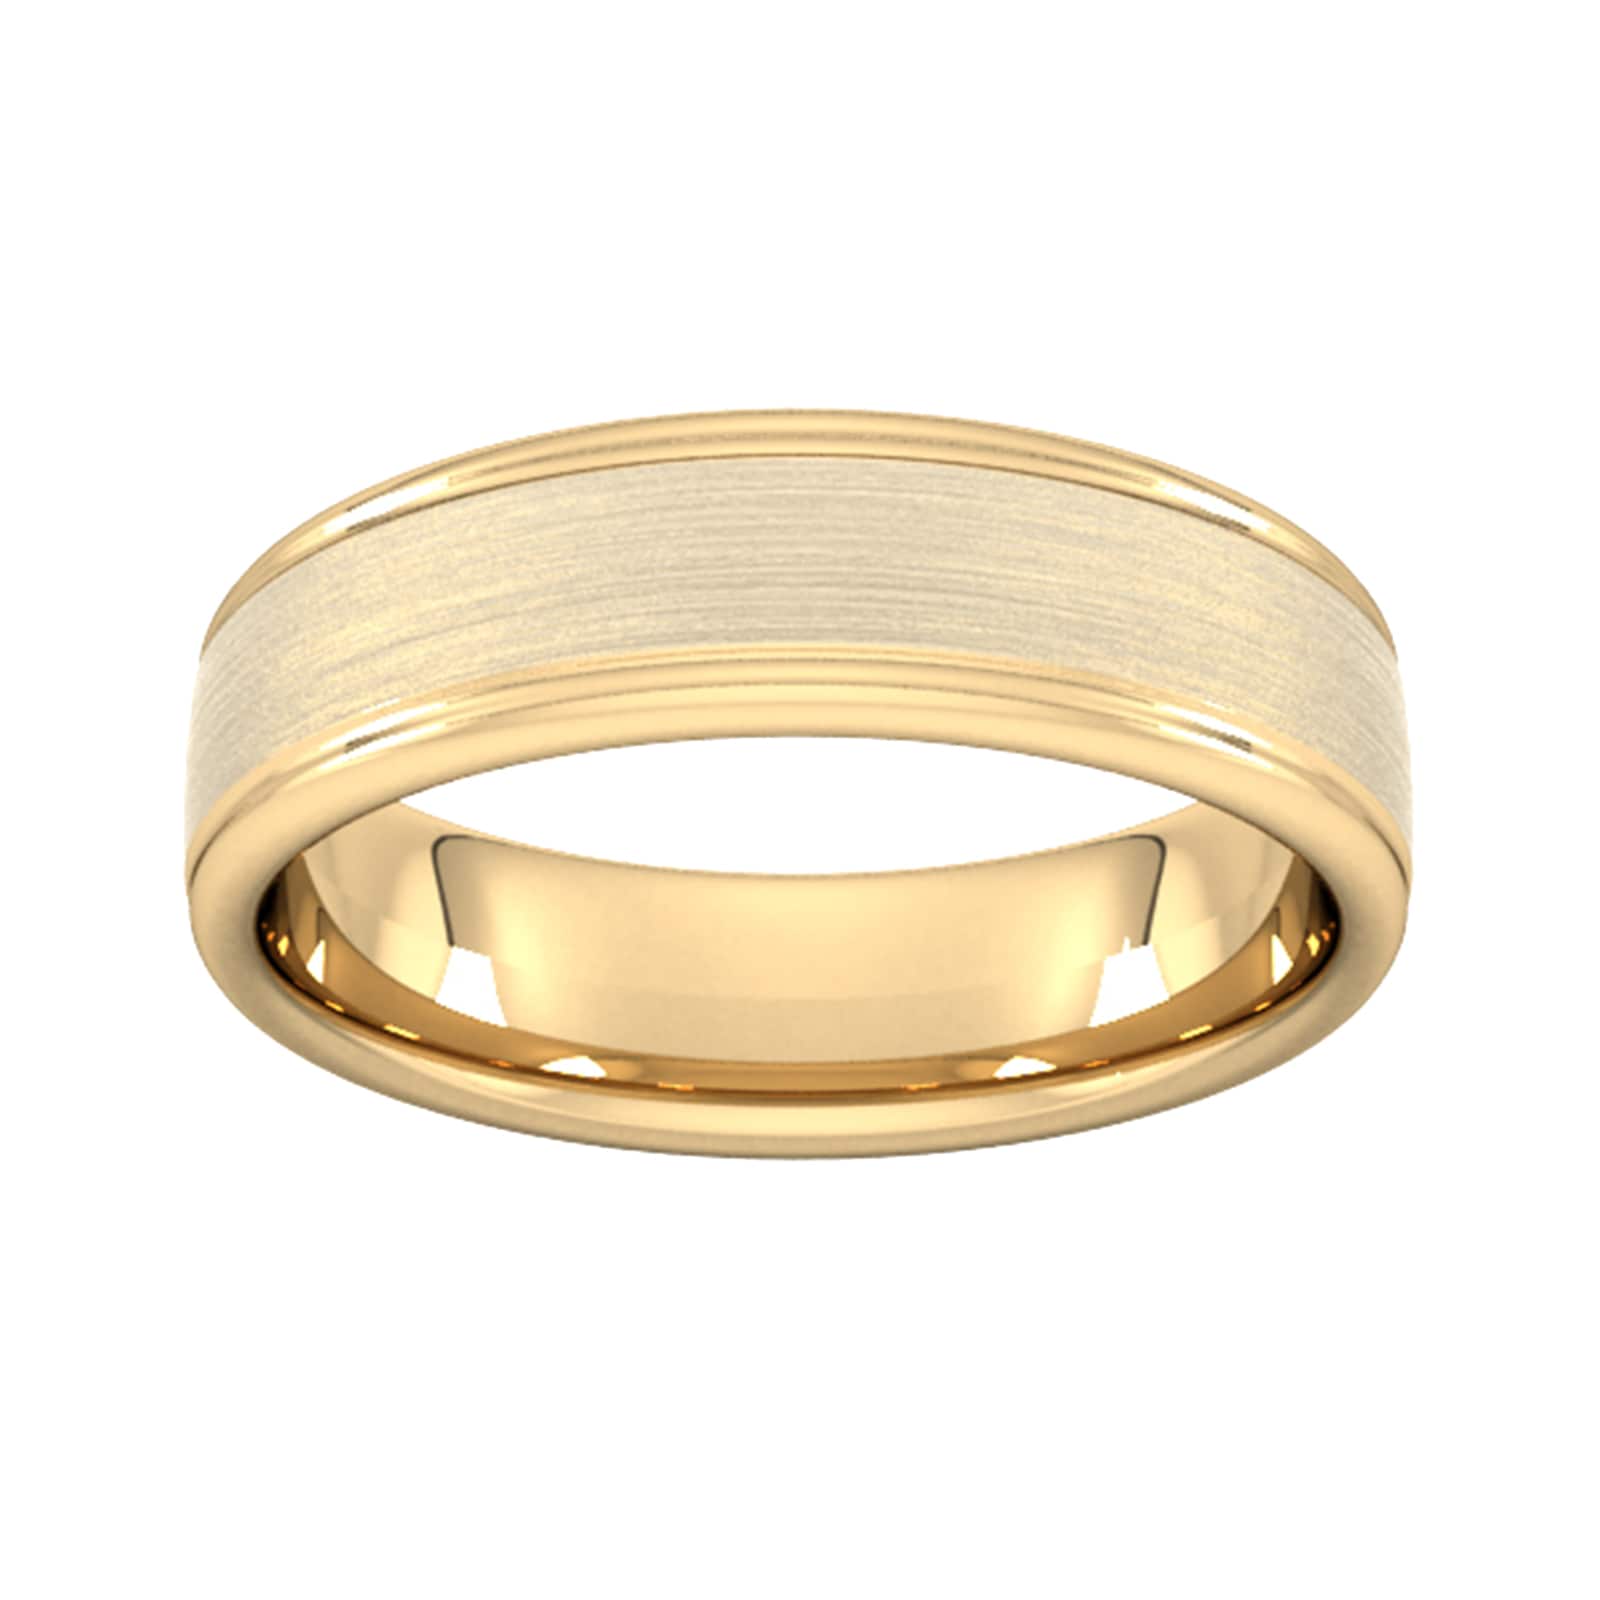 6mm D Shape Heavy Matt Centre With Grooves Wedding Ring In 18 Carat Yellow Gold - Ring Size X